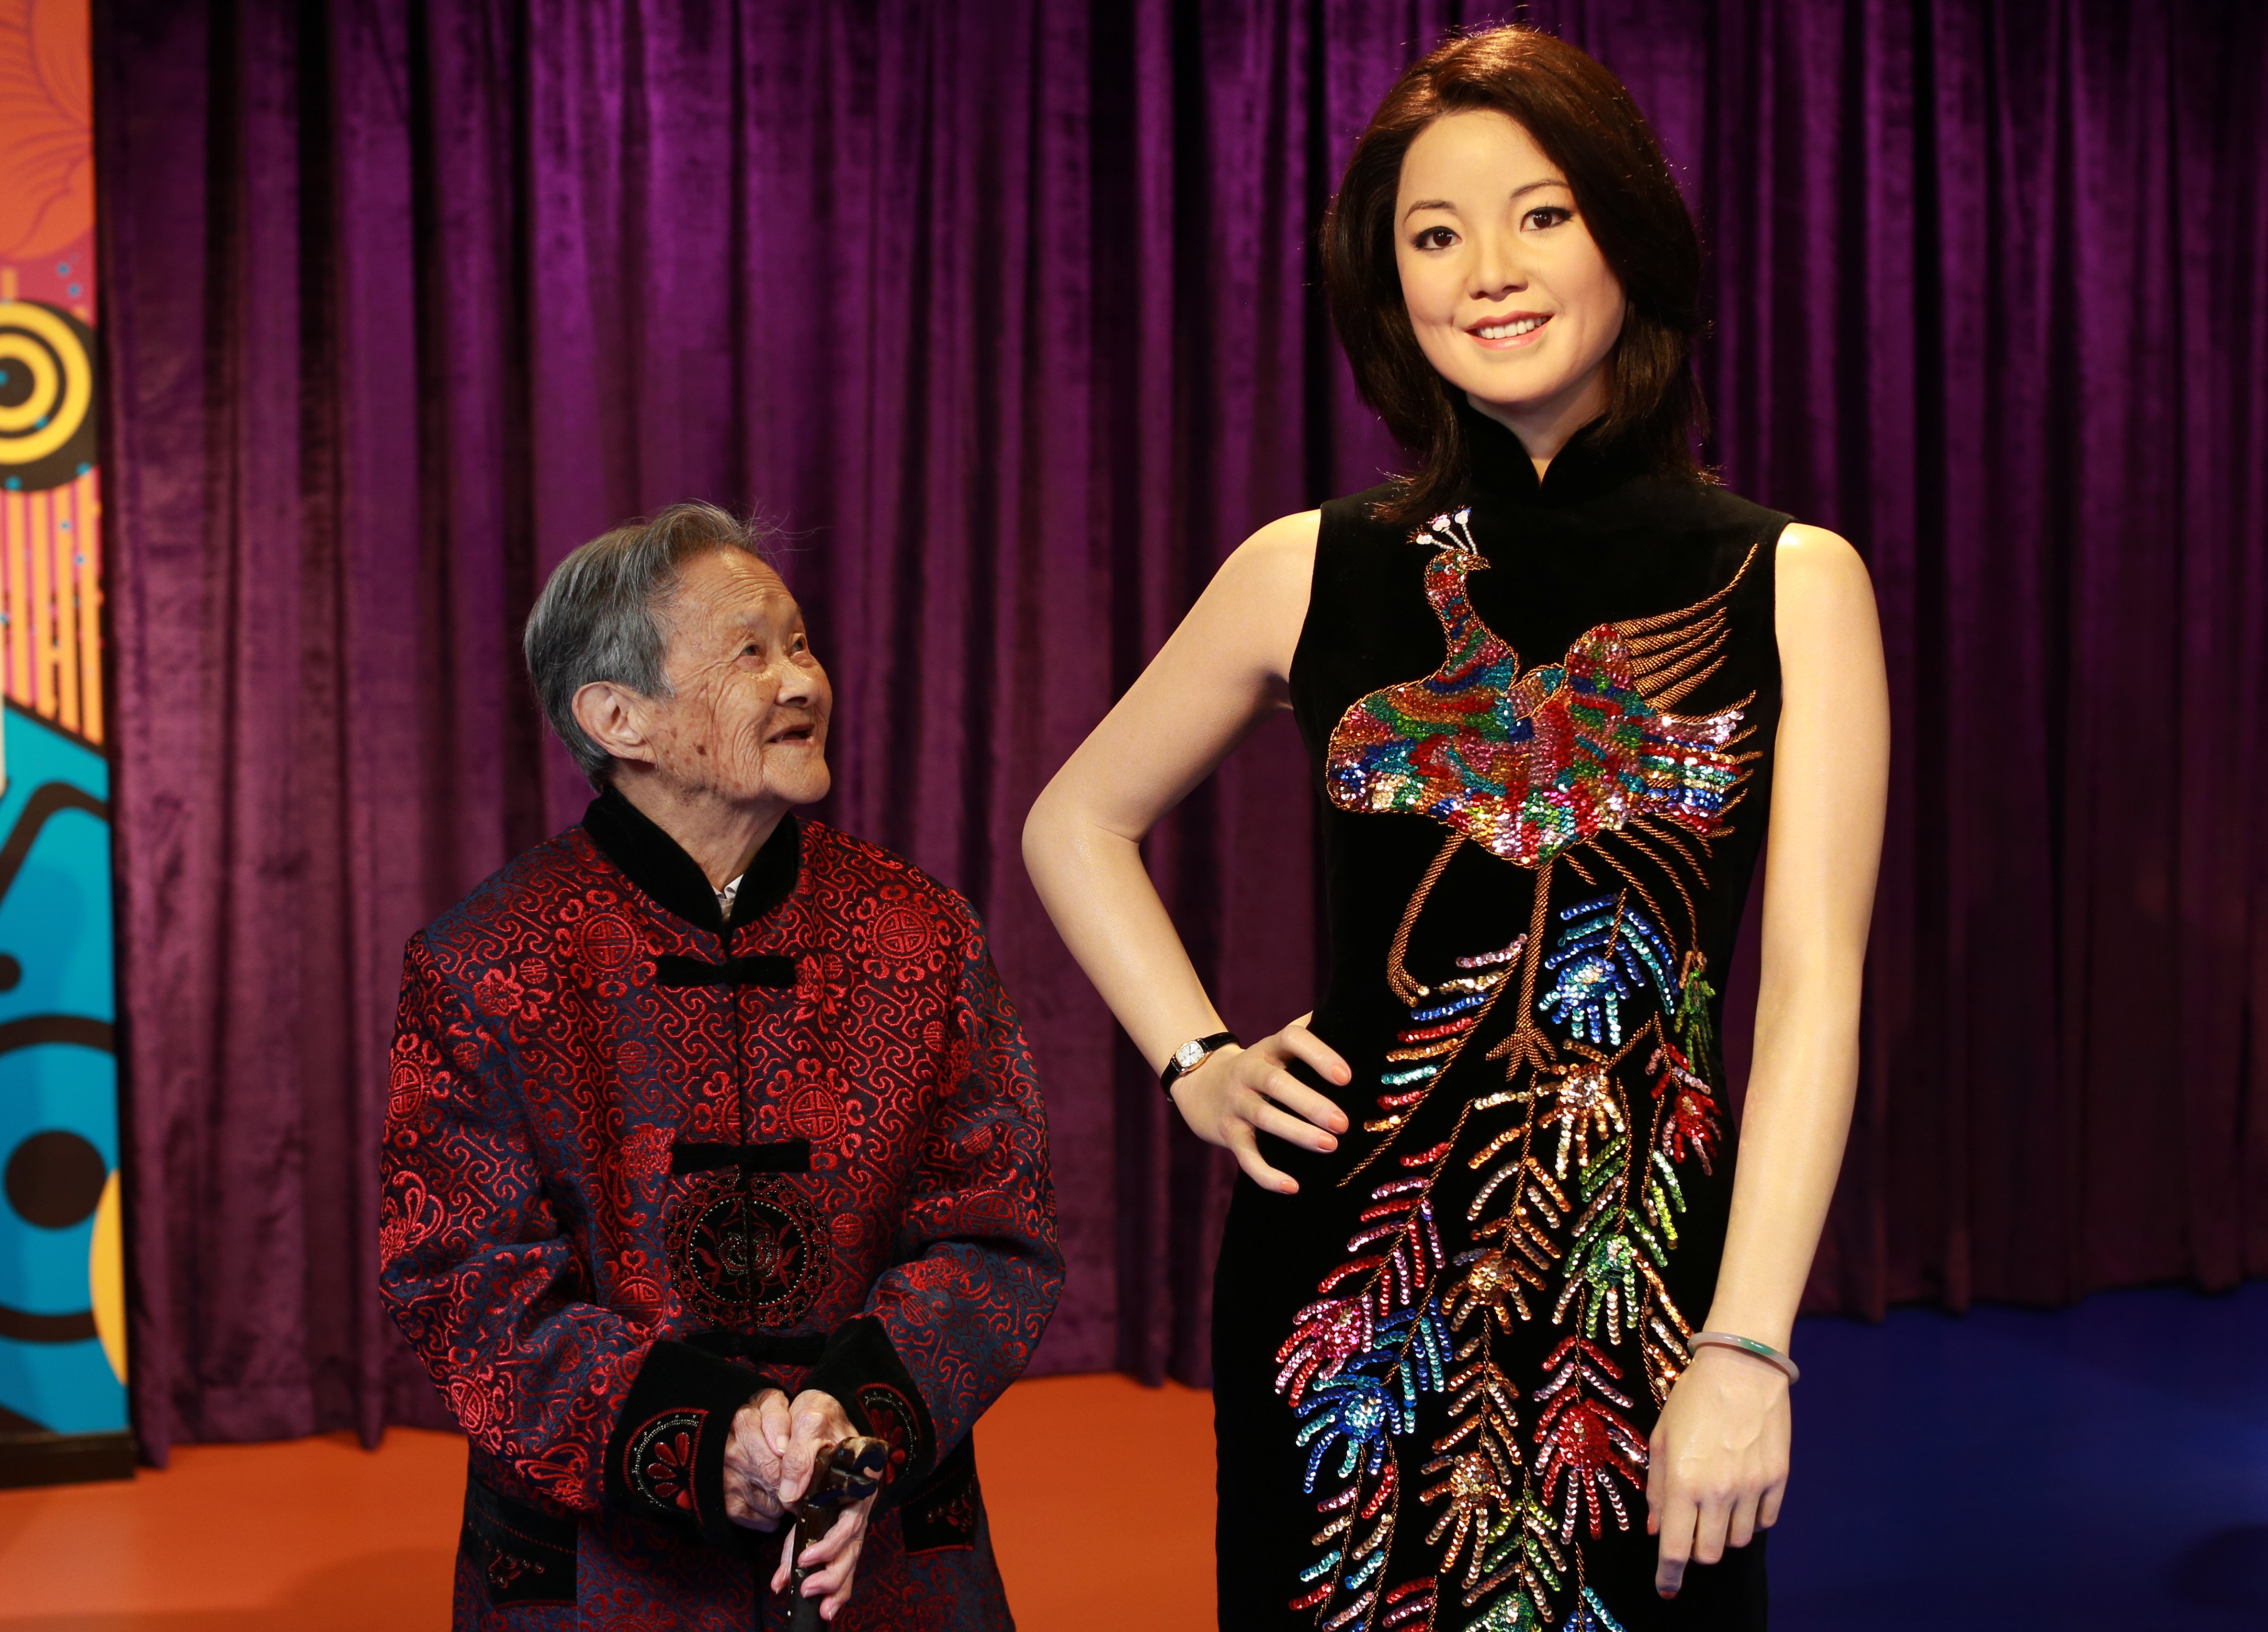 uang Xiaogui, 100 years old, poses with a wax figure of Teresa Teng at Madame Tussauds on in Wuhan, China on Oct. 11, 2013. (VCG—VCG/Getty Images H)